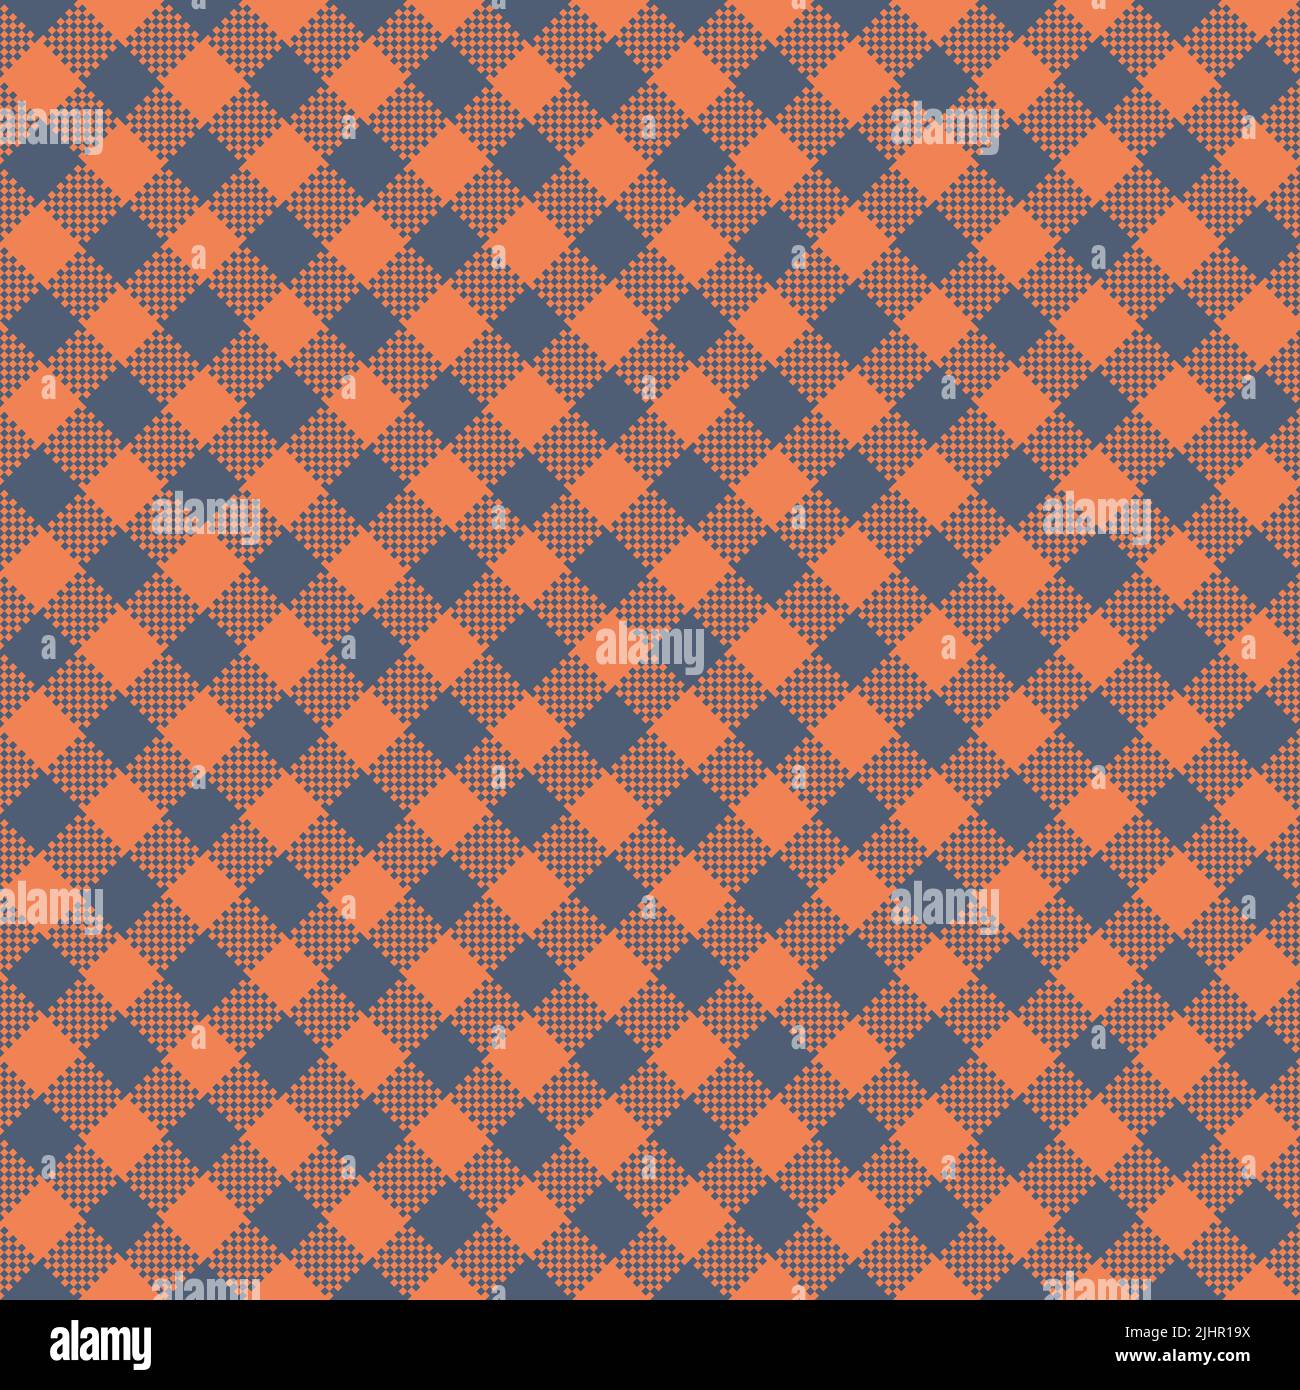 photography - and stock pattern images Alamy background Coral plaid hi-res